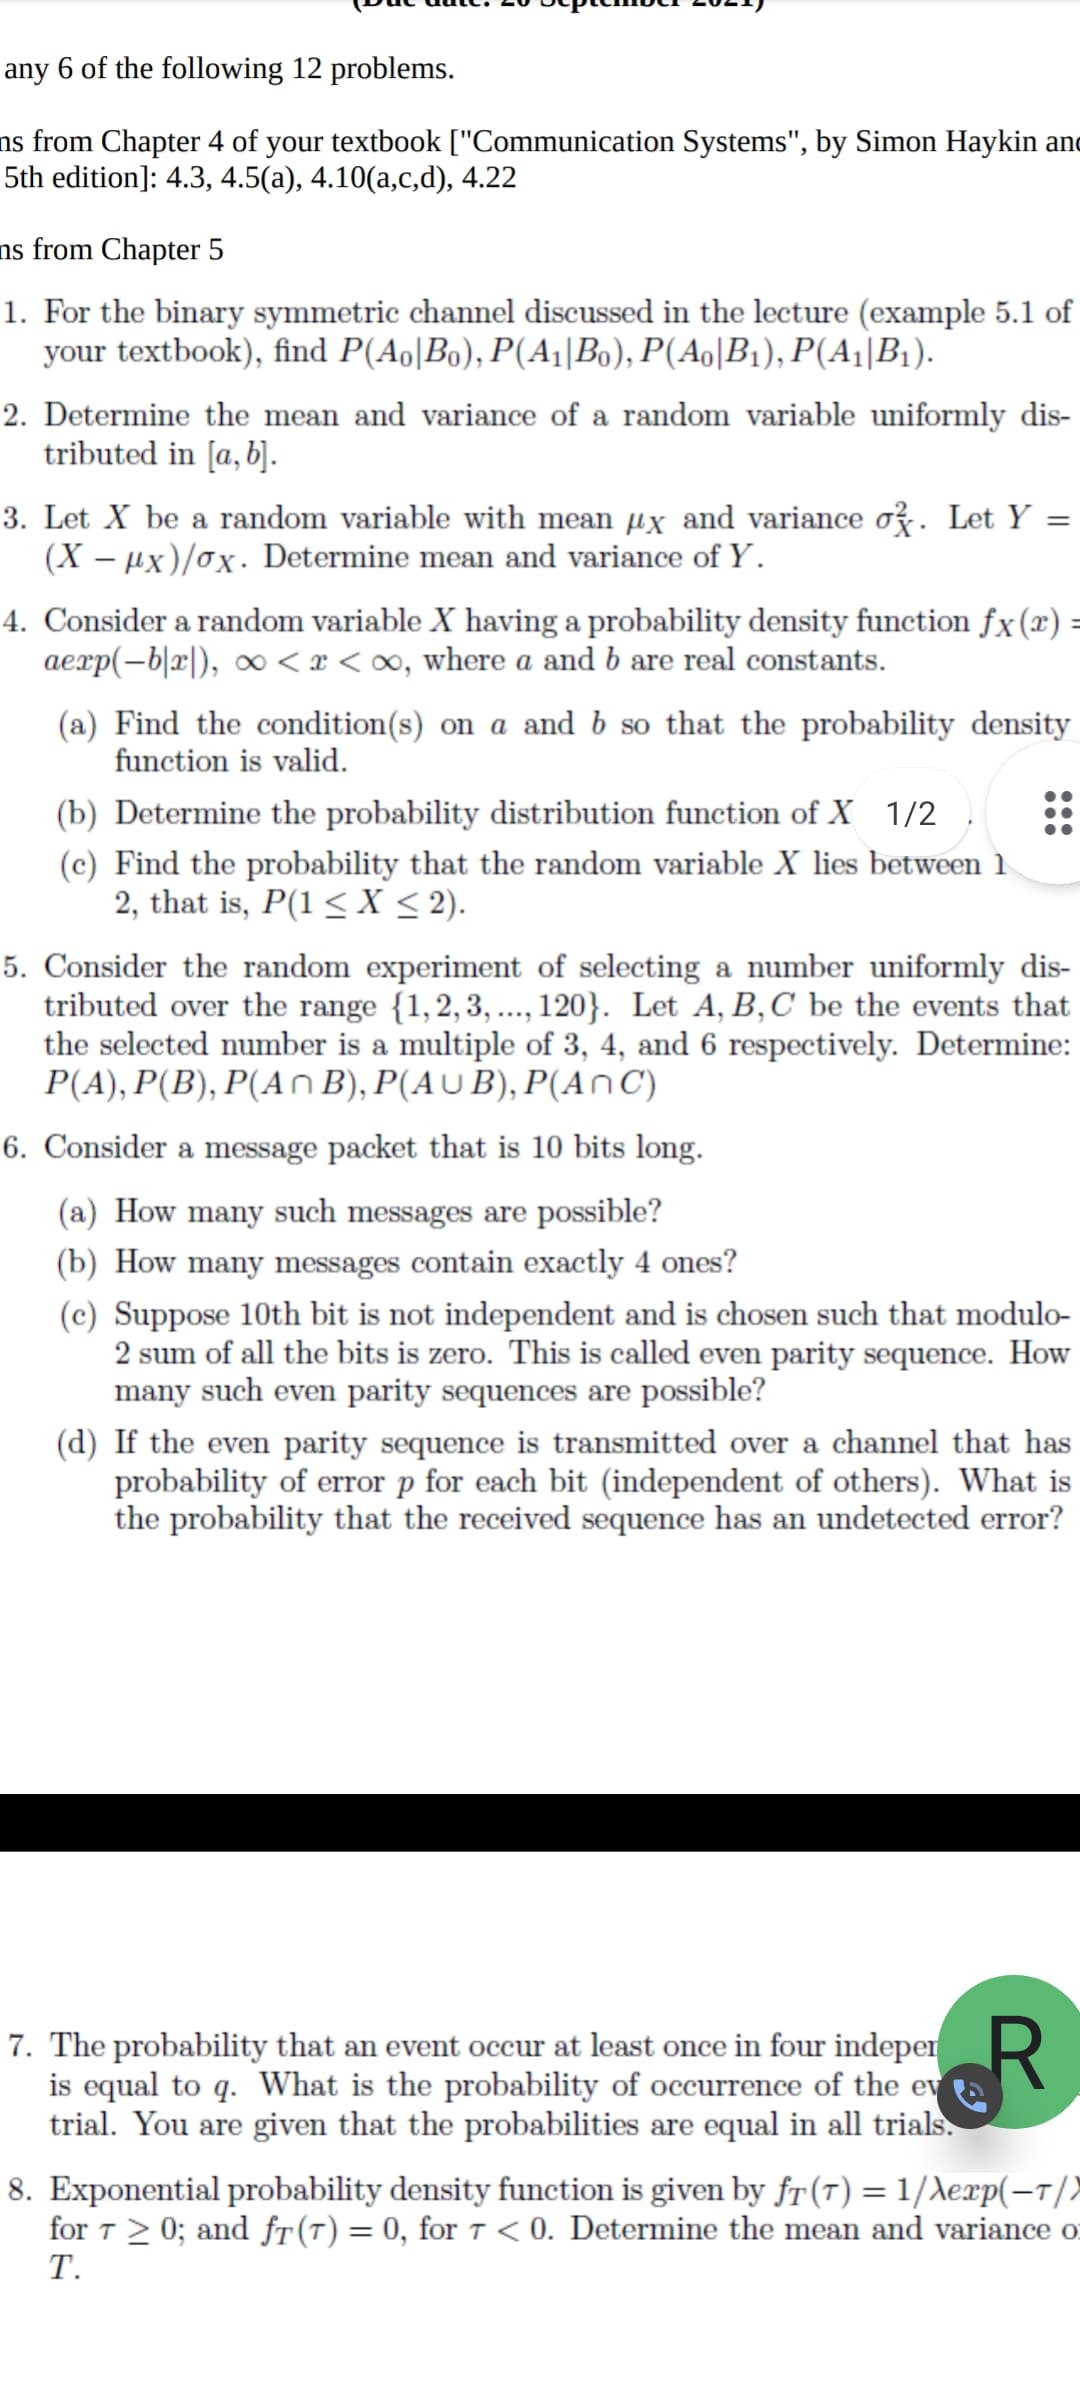 any 6 of the following 12 problems.
ns from Chapter 4 of your textbook ["Communication Systems", by Simon Haykin and
5th edition]: 4.3, 4.5(a), 4.10(a,c,d), 4.22
ns from Chapter 5
1. For the binary symmetric channel discussed in the lecture (example 5.1 of
your textbook), find P(Ao|Bo), P(A¡|Bo), P(Ao|B1), P(A¡|B1).
2. Determine the mean and variance of a random variable uniformly dis-
tributed in [a, b].
3. Let X be a random variable with mean µx and variance oz. Let Y
(X – µx)/ox. Determine mean and variance of Y.
4. Consider a random variable X having a probability density function fx(x) =
aexp(-b|x|), ∞ < x < ∞, where a and b are real constants.
(a) Find the condition(s) on a and b so that the probability density
function is valid.
(b) Determine the probability distribution function of X 1/2
(c) Find the probability that the random variable X lies between 1
2, that is, P(1 < X < 2).
5. Consider the random experiment of selecting a number uniformly dis-
tributed over the range {1,2,3, ..., 120}. Let A, B,C be the events that
the selected number is a multiple of 3, 4, and 6 respectively. Determine:
P(A), P(B), P(An B), P(AU B), P(AnC)
6. Consider a message packet that is 10 bits long.
(a) How many such messages are possible?
(b) How many messages contain exactly 4 ones?
(c) Suppose 10th bit is not independent and is chosen such that modulo-
2 sum of all the bits is zero. This is called even parity sequence. How
many such even parity sequences are possible?
(d) If the even parity sequence is transmitted over a channel that has
probability of error p for each bit (independent of others). What is
the probability that the received sequence has an undetected error?
7. The probability that an event occur at least once in four indeper R
is equal to q. What is the probability of occurrence of the ev
trial. You are given that the probabilities are equal in all trials.
8. Exponential probability density function is given by fr (7) = 1/Xexp(-1/)
for T > 0; and fT(T) = 0, for 7 < 0. Determine the mean and variance o
Т.
